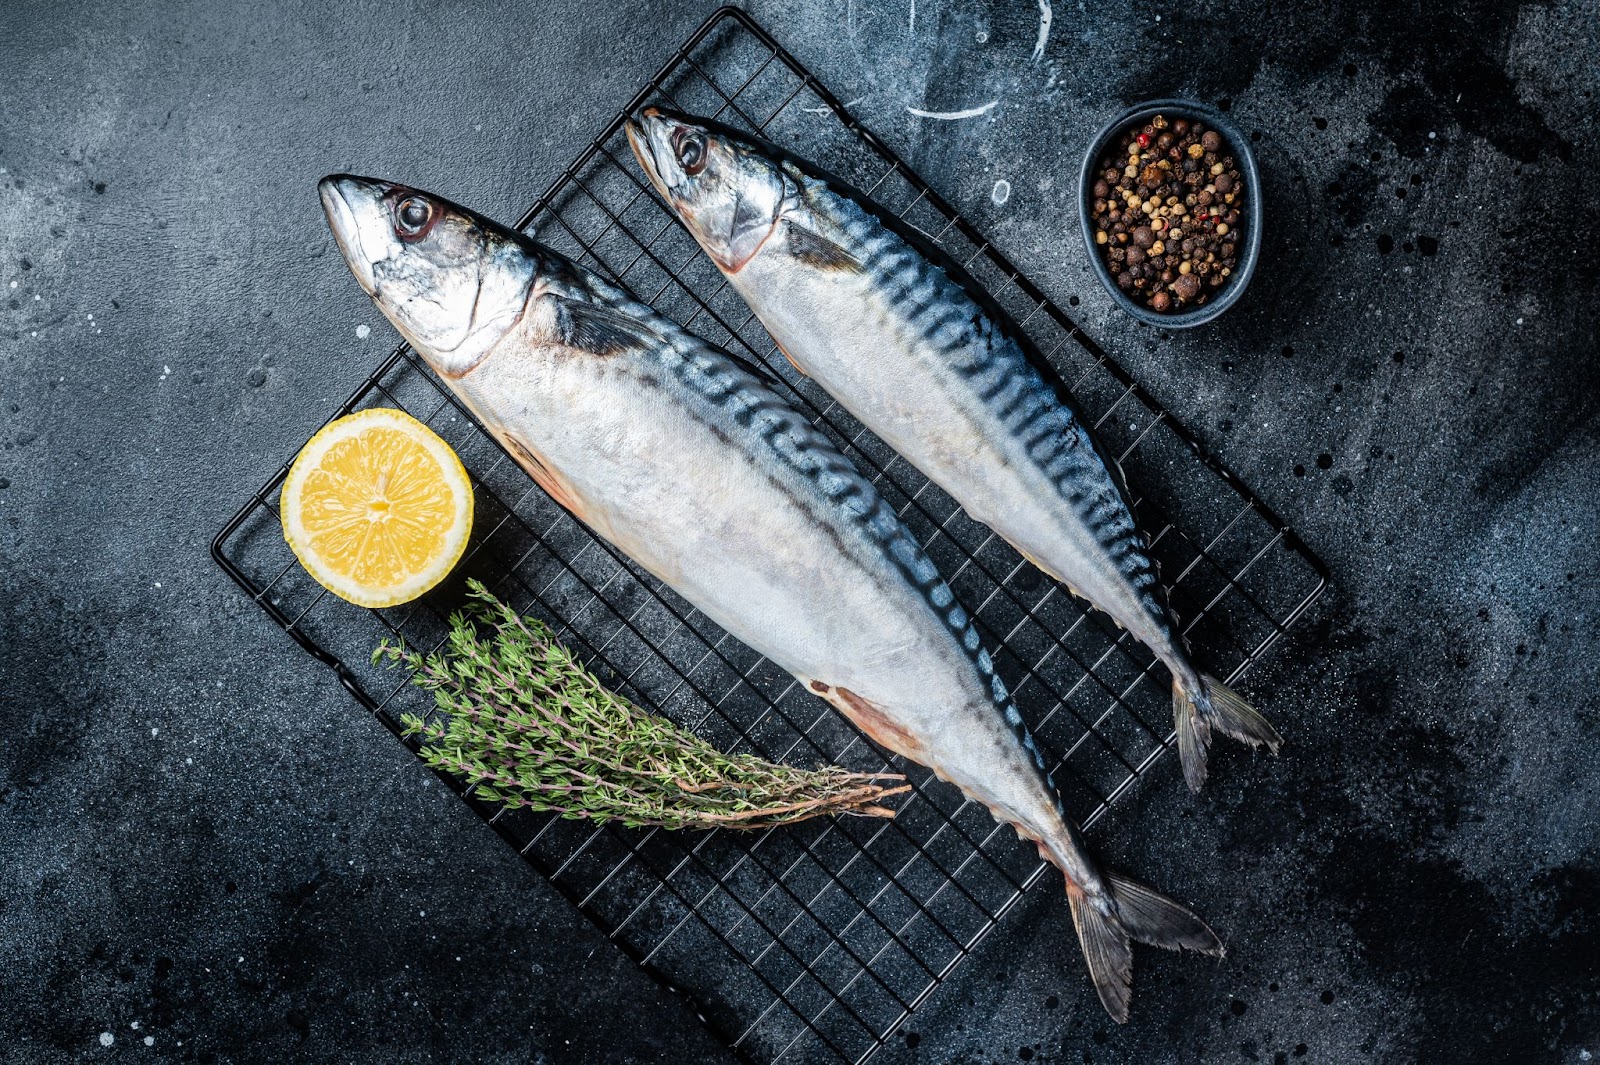 <p>Fatty fish like salmon, mackerel, and sardines are a nutritional powerhouse for brain health. Packed with omega-3 fatty acids, these fish act as a time machine for cognitive function, promoting sharpness and potentially protecting against age-related decline. The benefits extend beyond the brain, as omega-3s also possess potent anti-inflammatory properties that can positively impact heart health, joint mobility, and mood regulation.</p> <p>Integrating these oily fish into your diet is both simple and delicious. Savor a succulent grilled salmon filet alongside a medley of colorful vegetables, create a refreshing mackerel salad for a light lunch, or try sardines on whole-grain toast for a flavorful and nutritious snack. By incorporating fatty fish into your meals regularly, you can nourish your body and mind, setting the stage for a healthier and more vibrant life.</p>